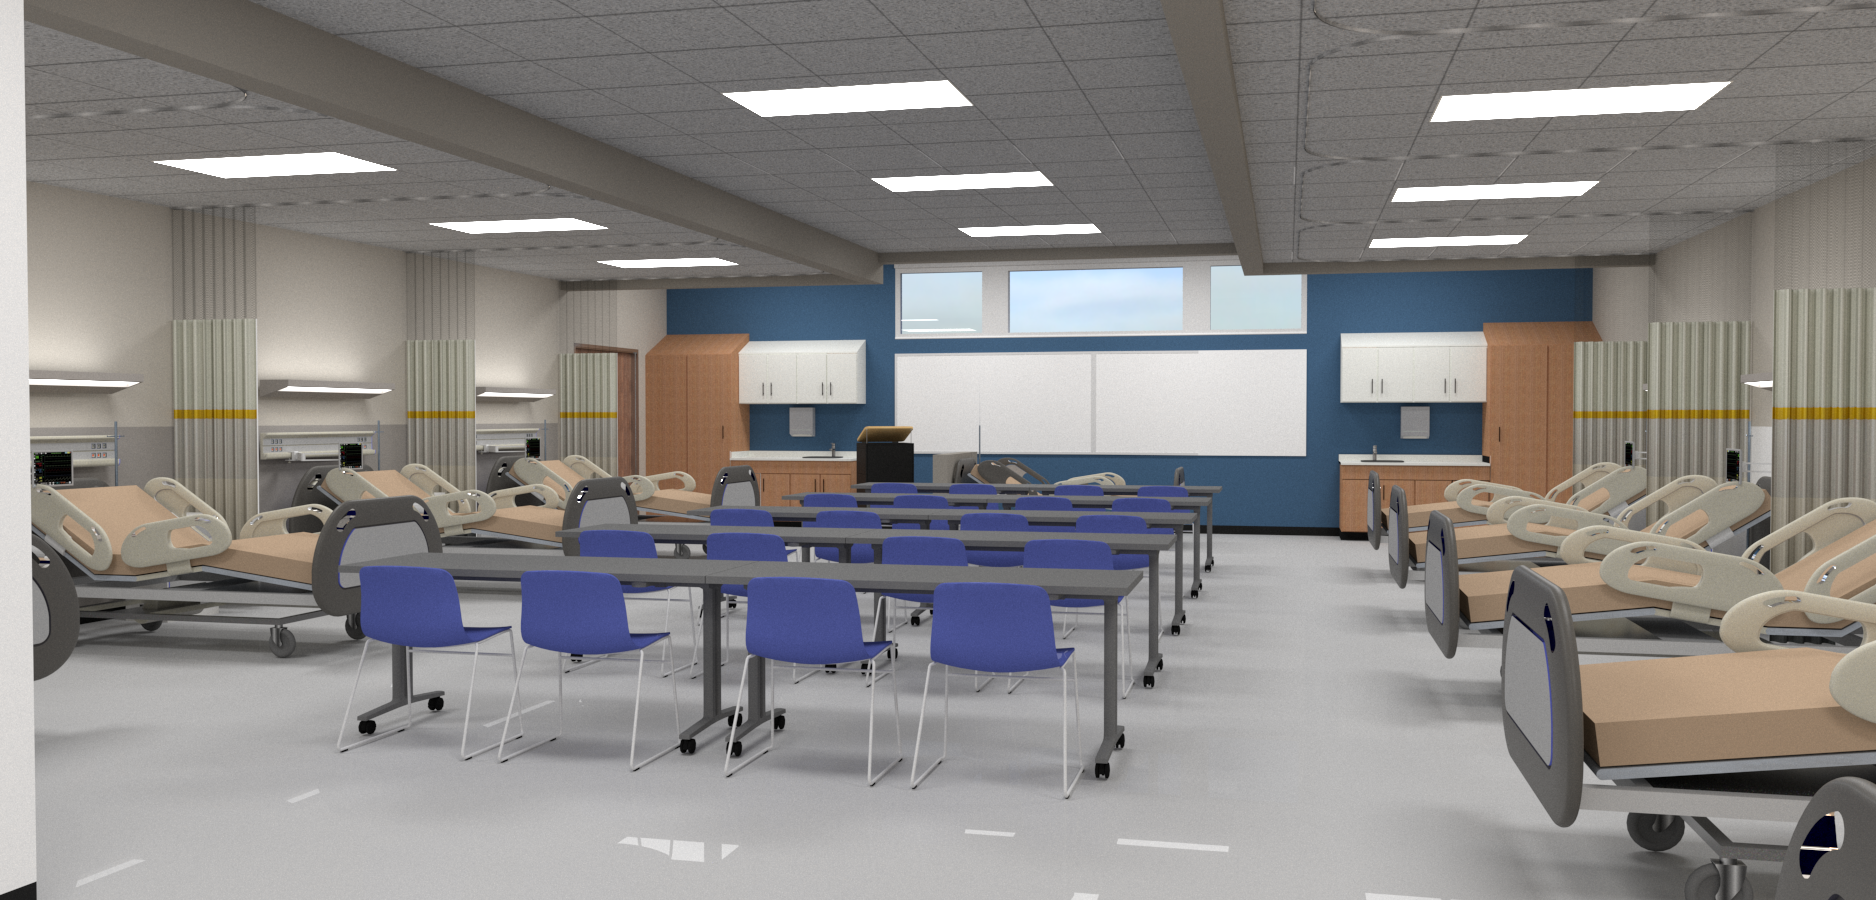 An architectural rendering of a simulation lab